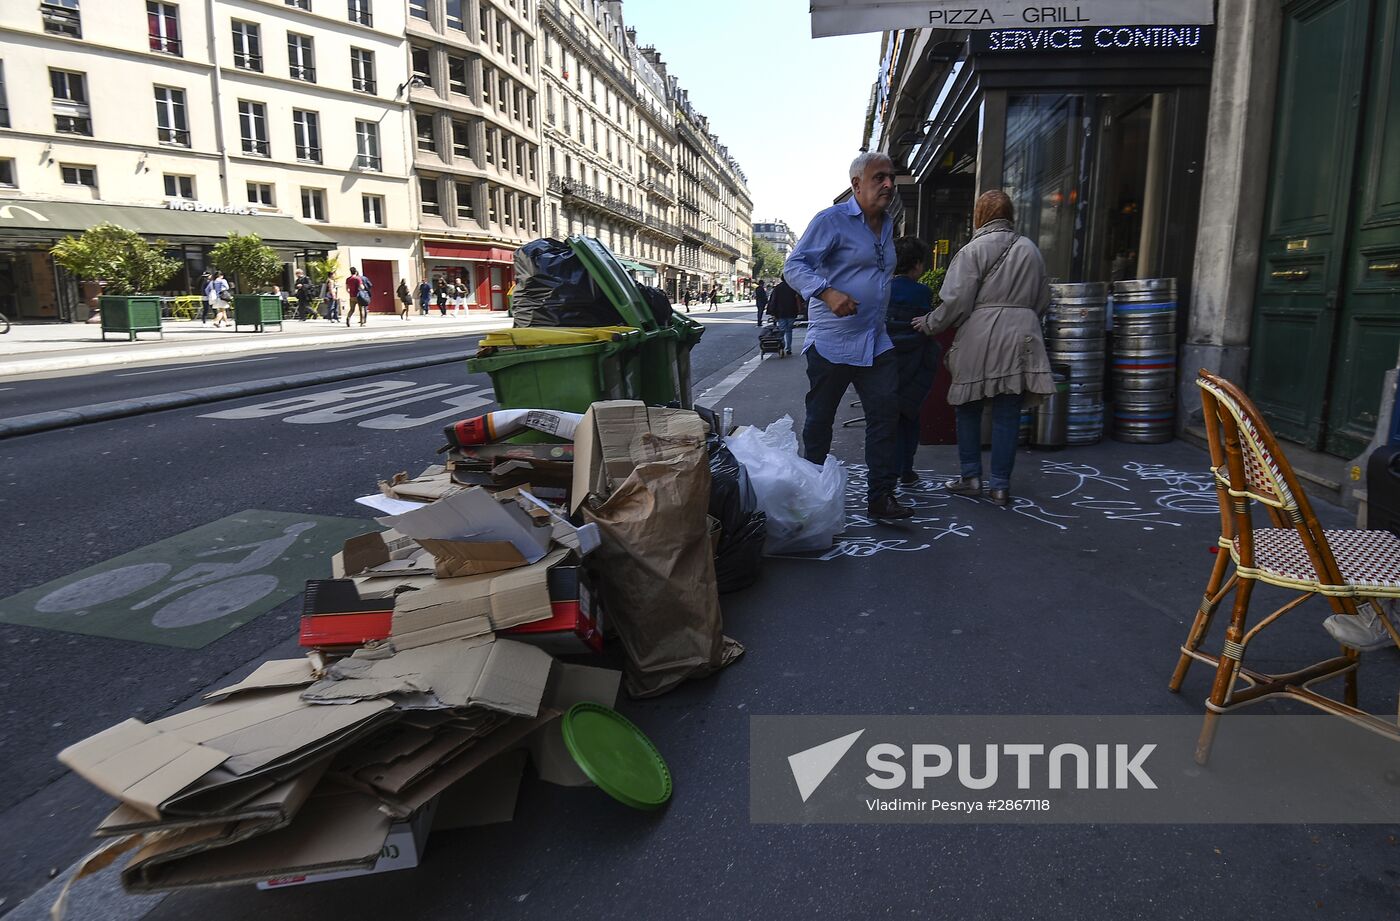 Trash piles up on strees of Paris as utility workers strike